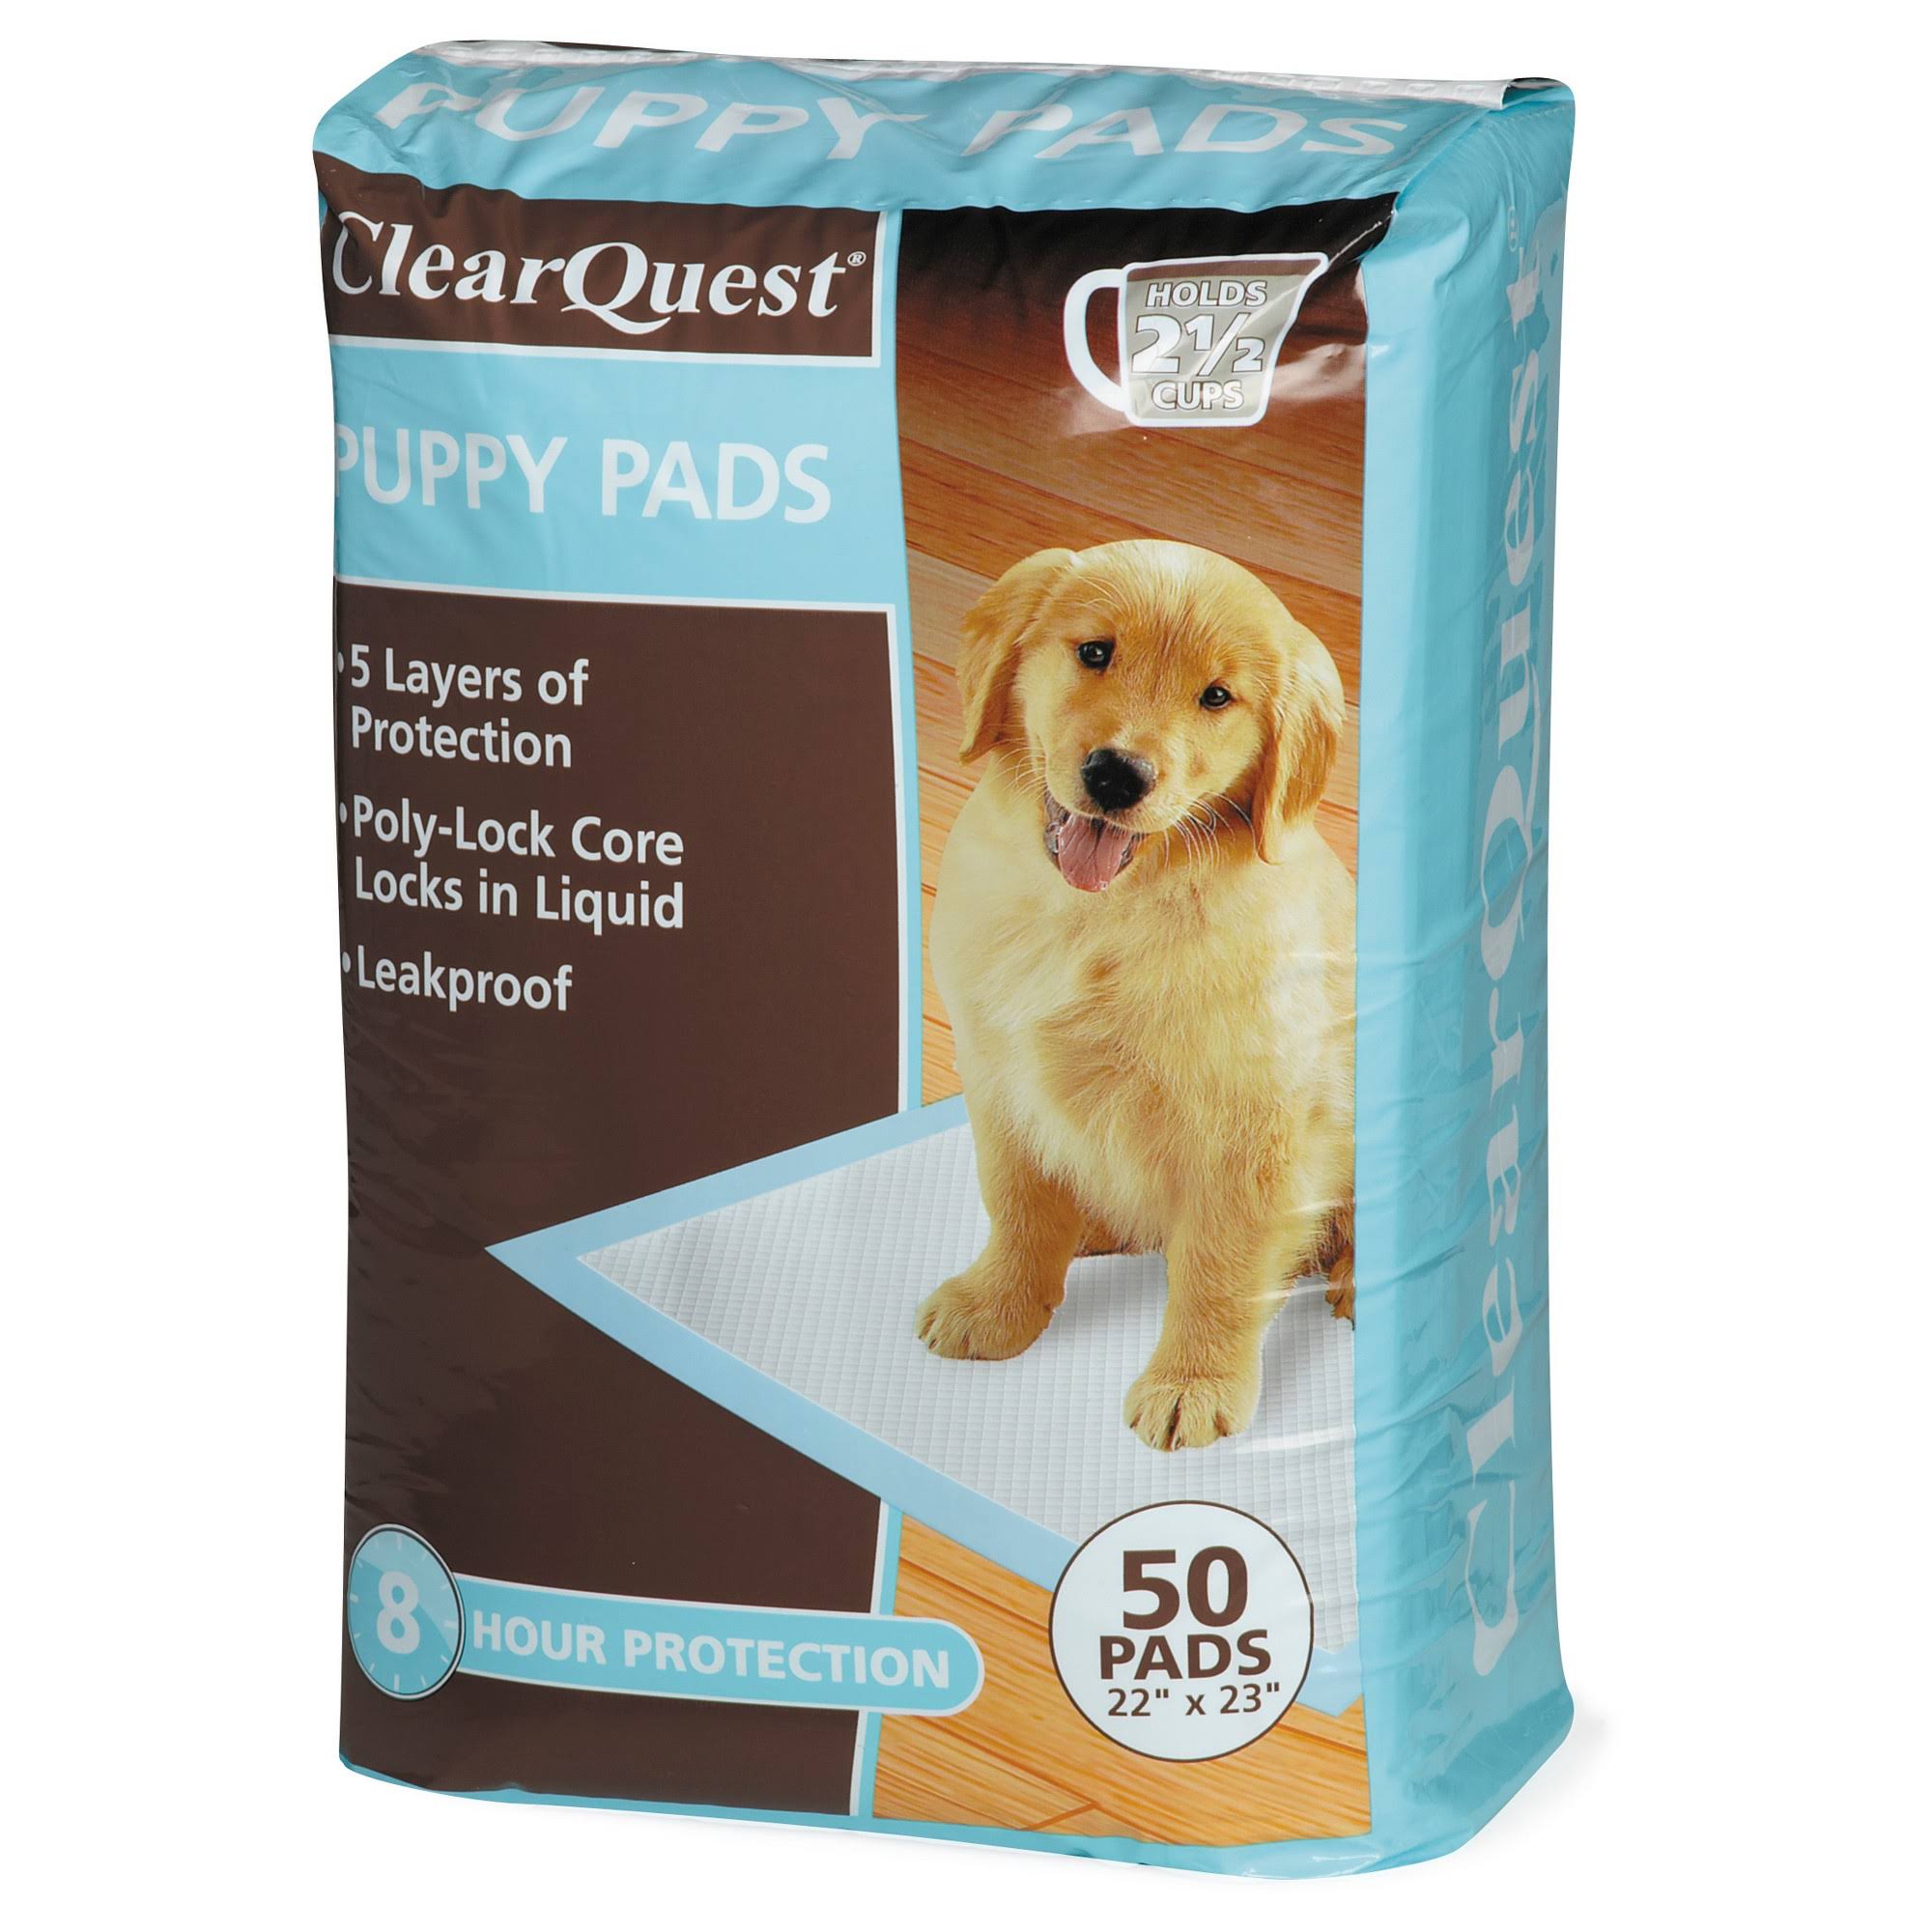 ClearQuest Puppy Pads 50ct Bag